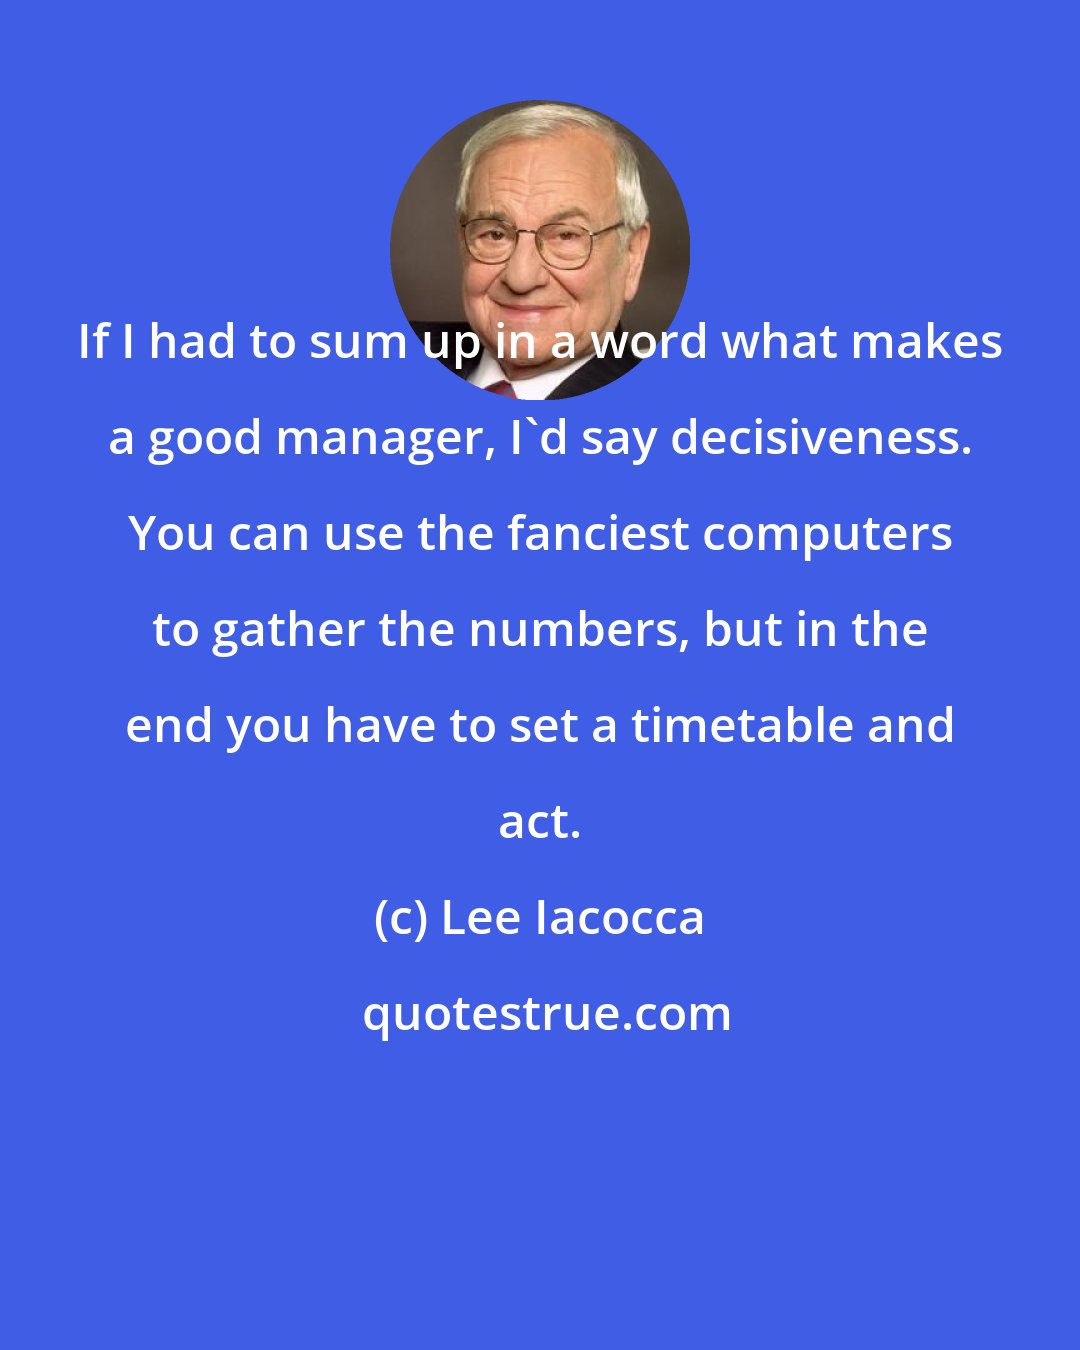 Lee Iacocca: If I had to sum up in a word what makes a good manager, I'd say decisiveness. You can use the fanciest computers to gather the numbers, but in the end you have to set a timetable and act.